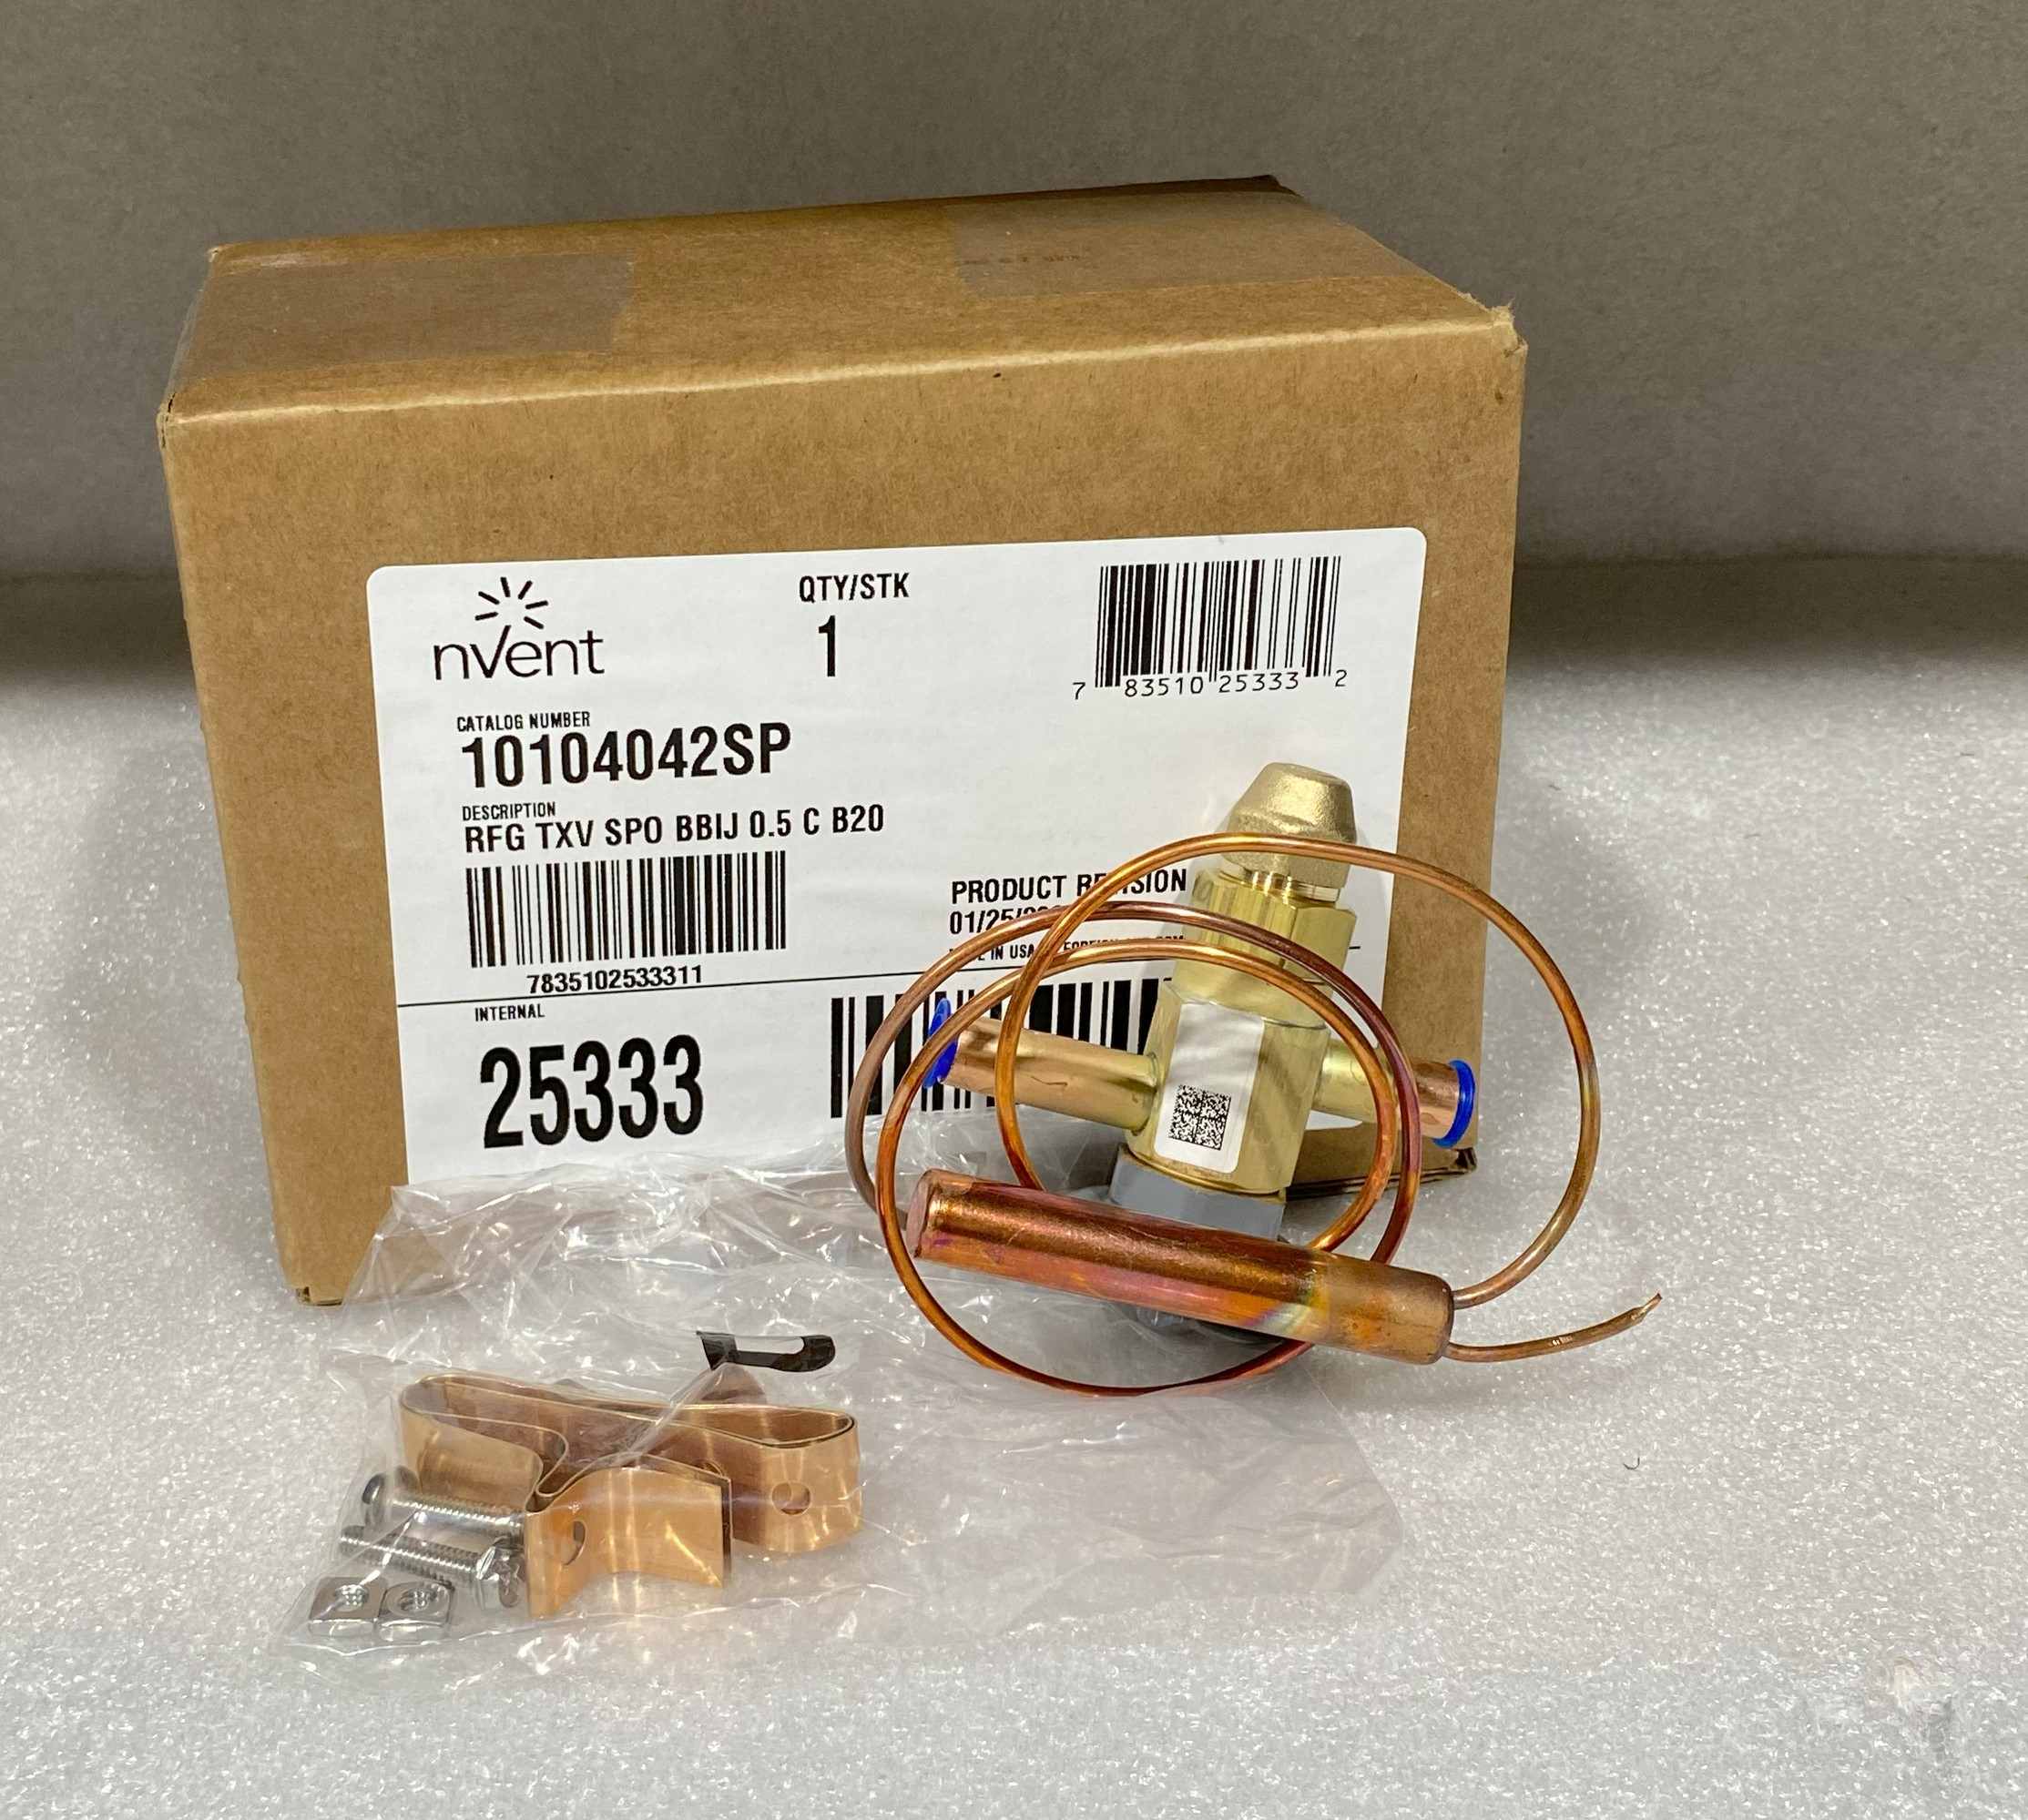 nVent 10104042SP Thermal Expansion Valve